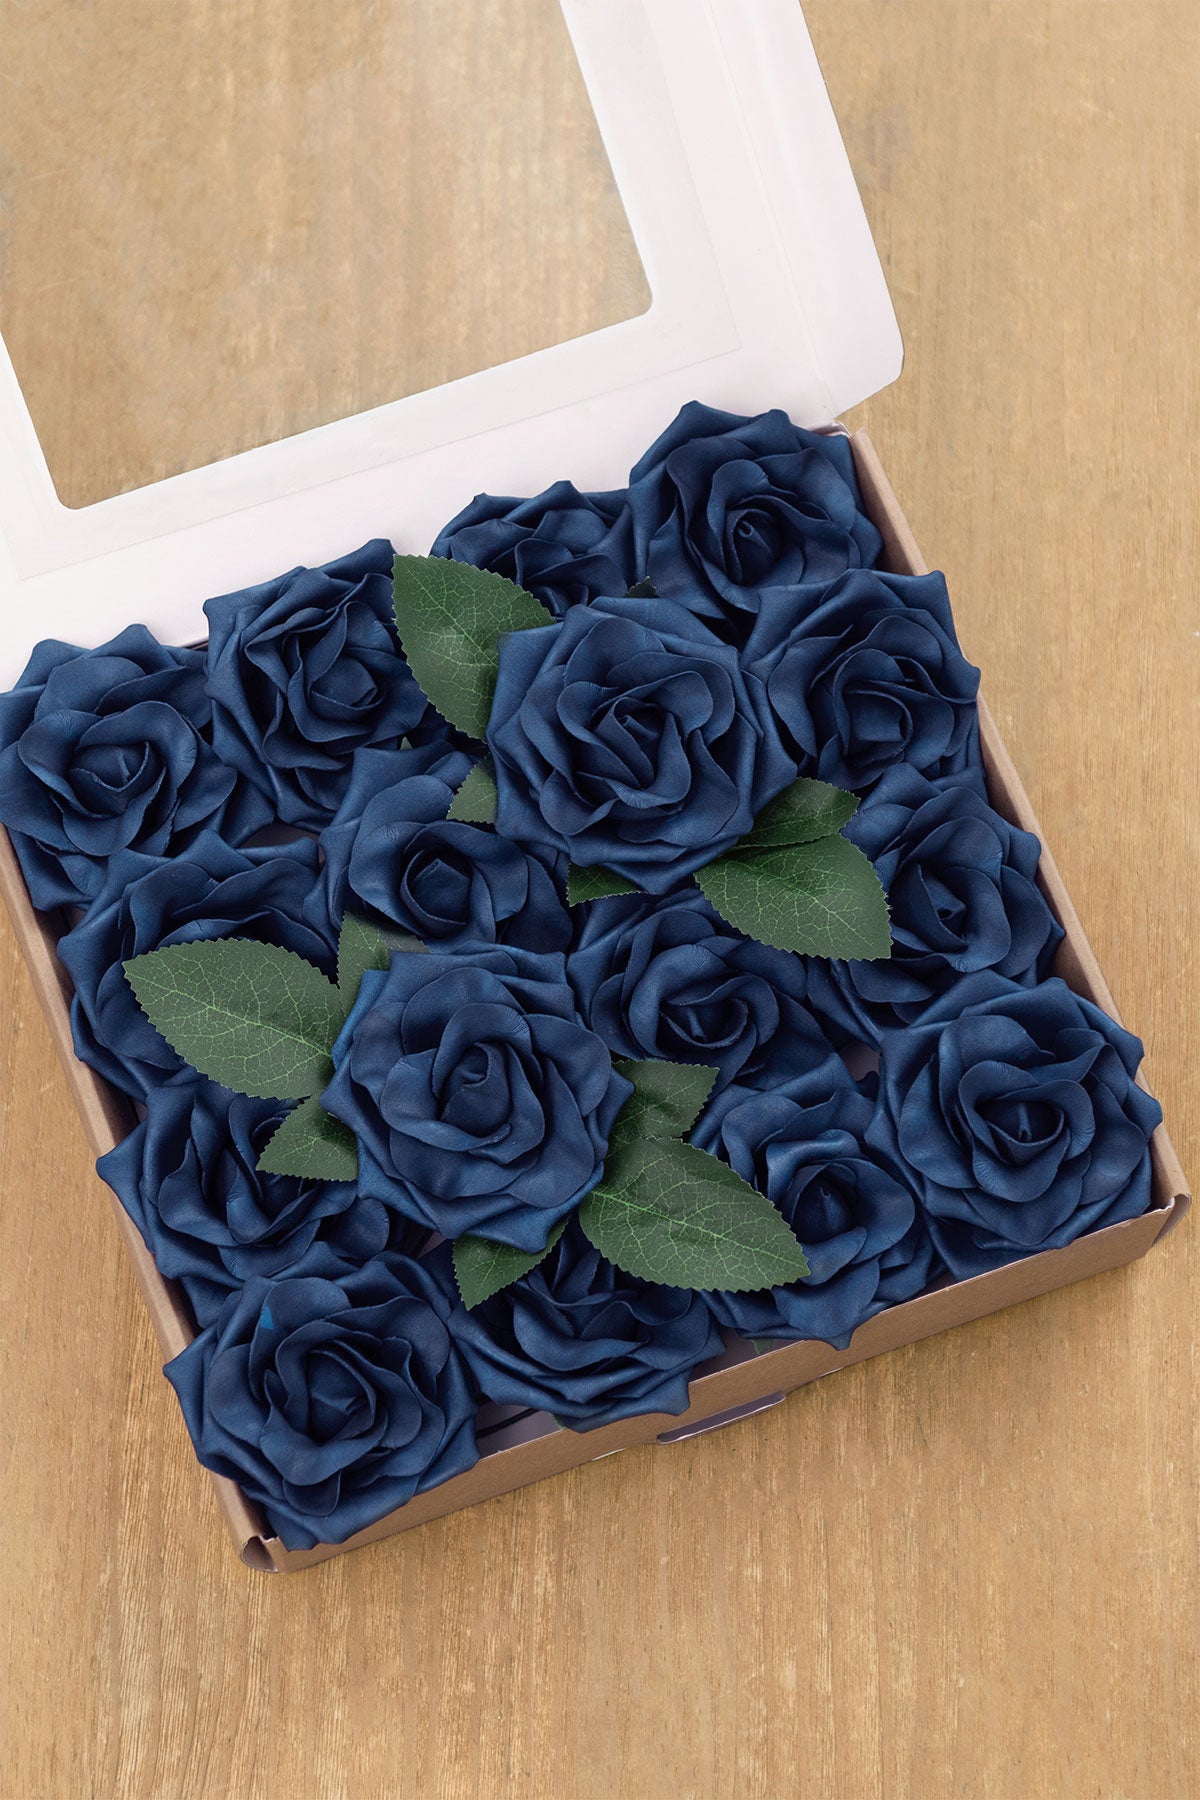 DIY Supporting Flower Boxes in Burgundy & Navy